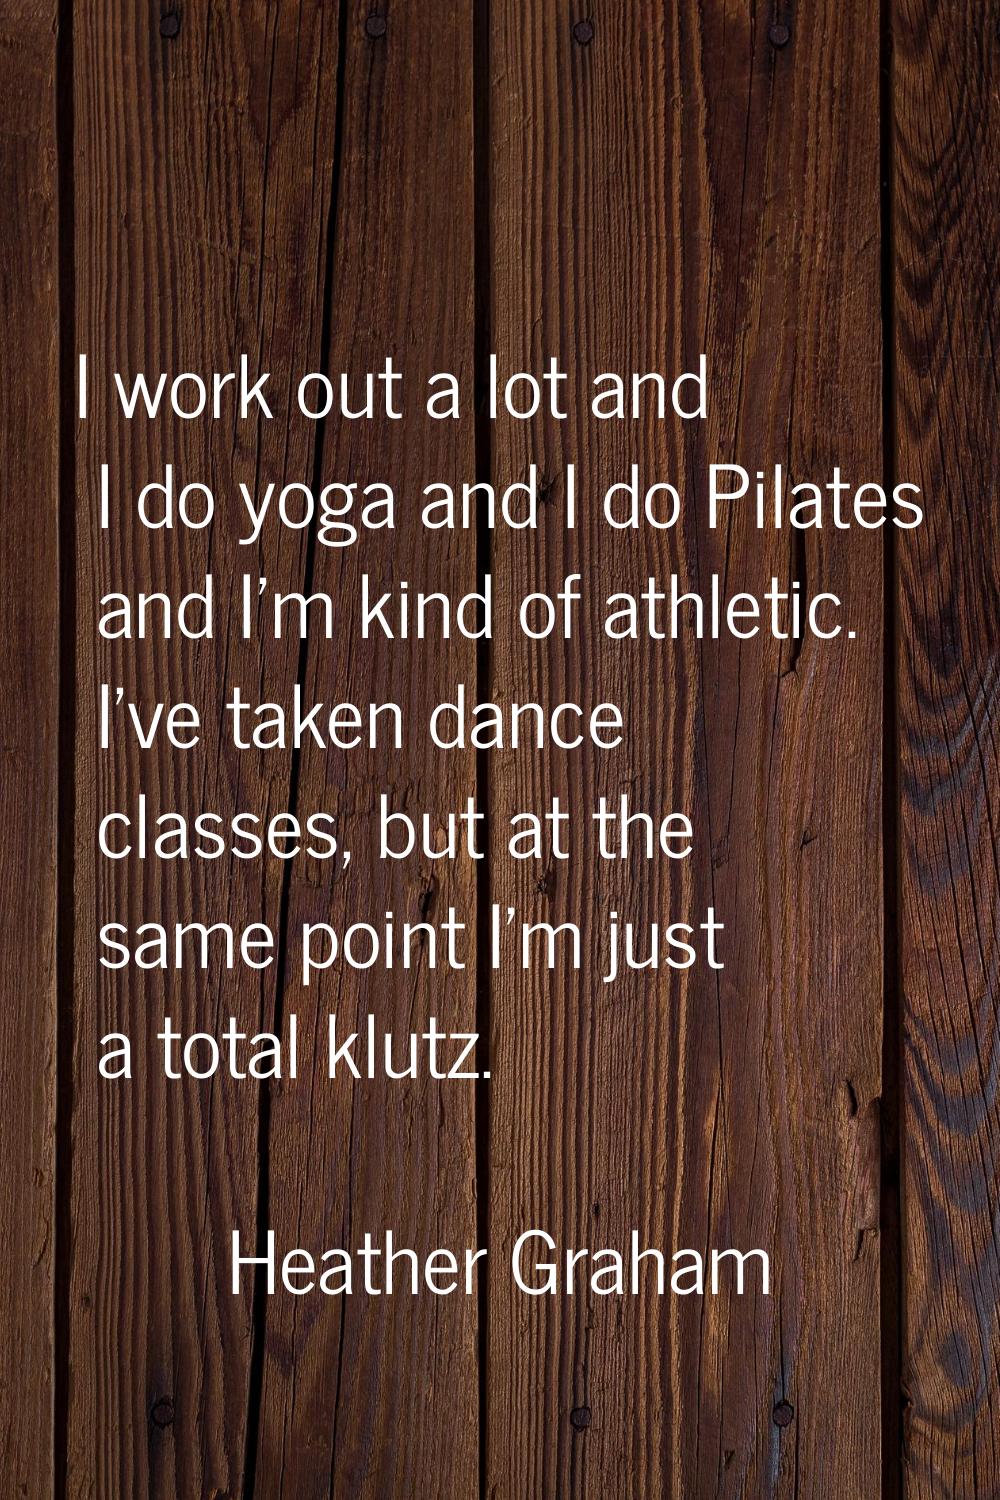 I work out a lot and I do yoga and I do Pilates and I'm kind of athletic. I've taken dance classes,